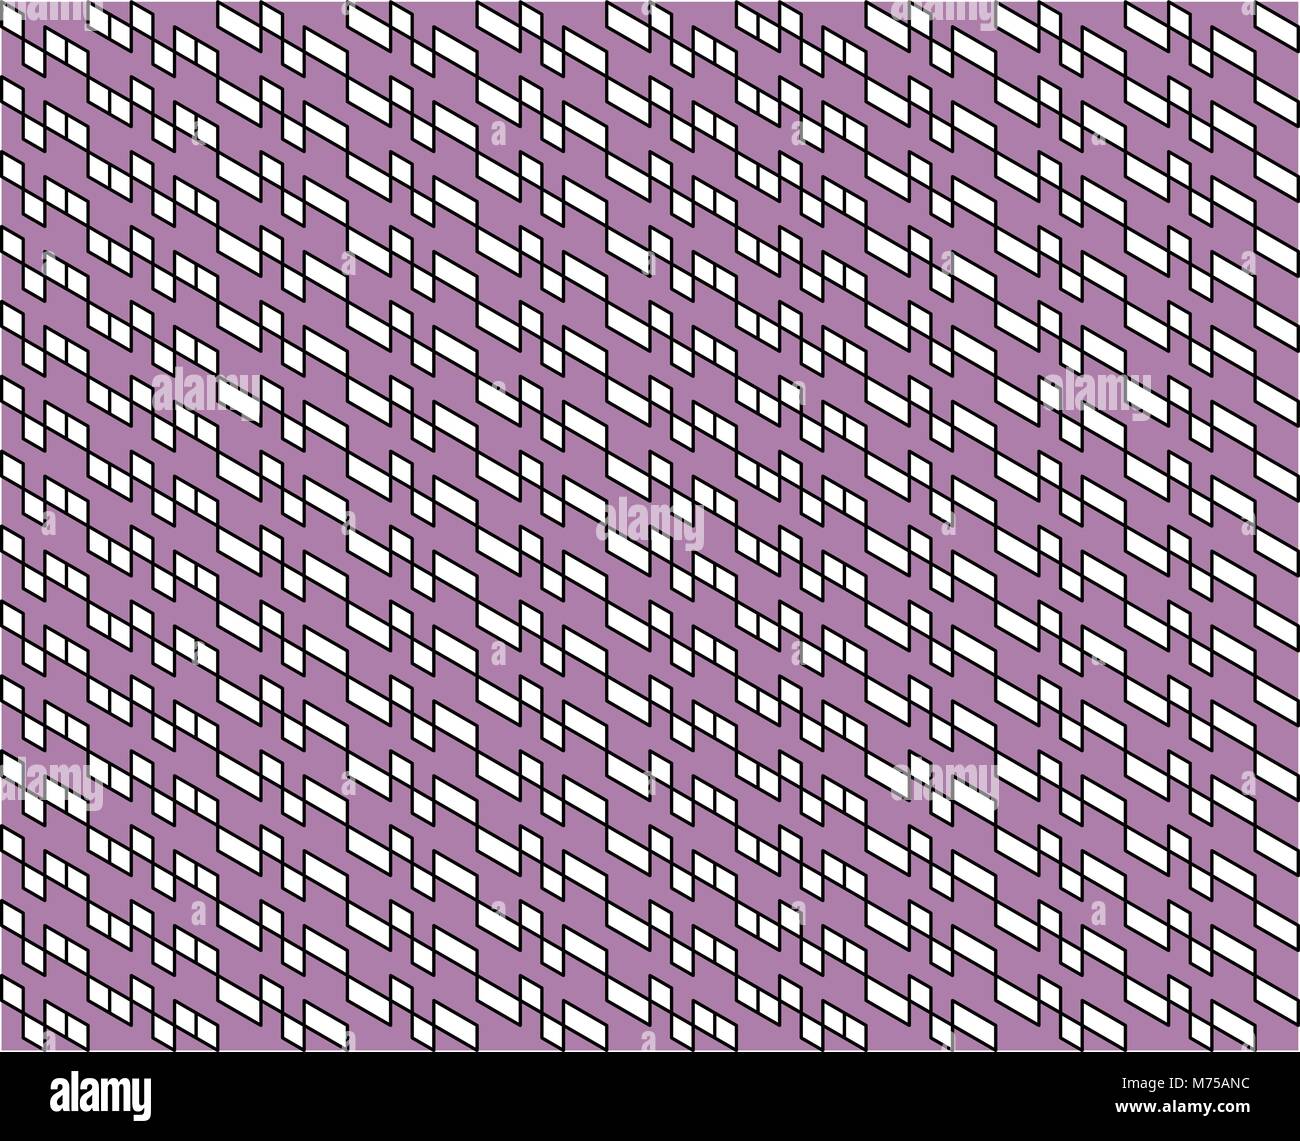 Abstract geometric pattern of ultra violet, black, and white colors - Vector illustration. Stock Vector